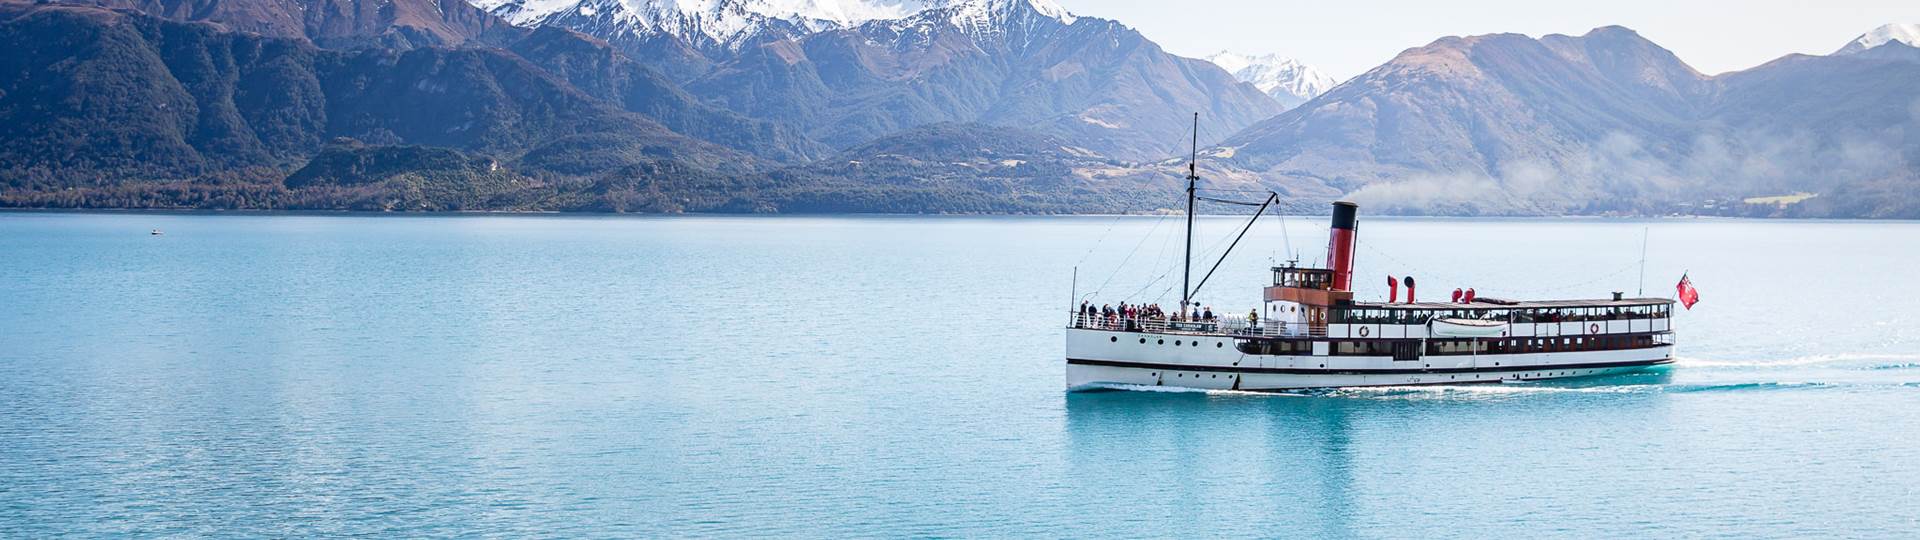 The historic TSS Earnslaw Steamship cruises along Lake Wakatipu with a view of The Remarkables mountain range 